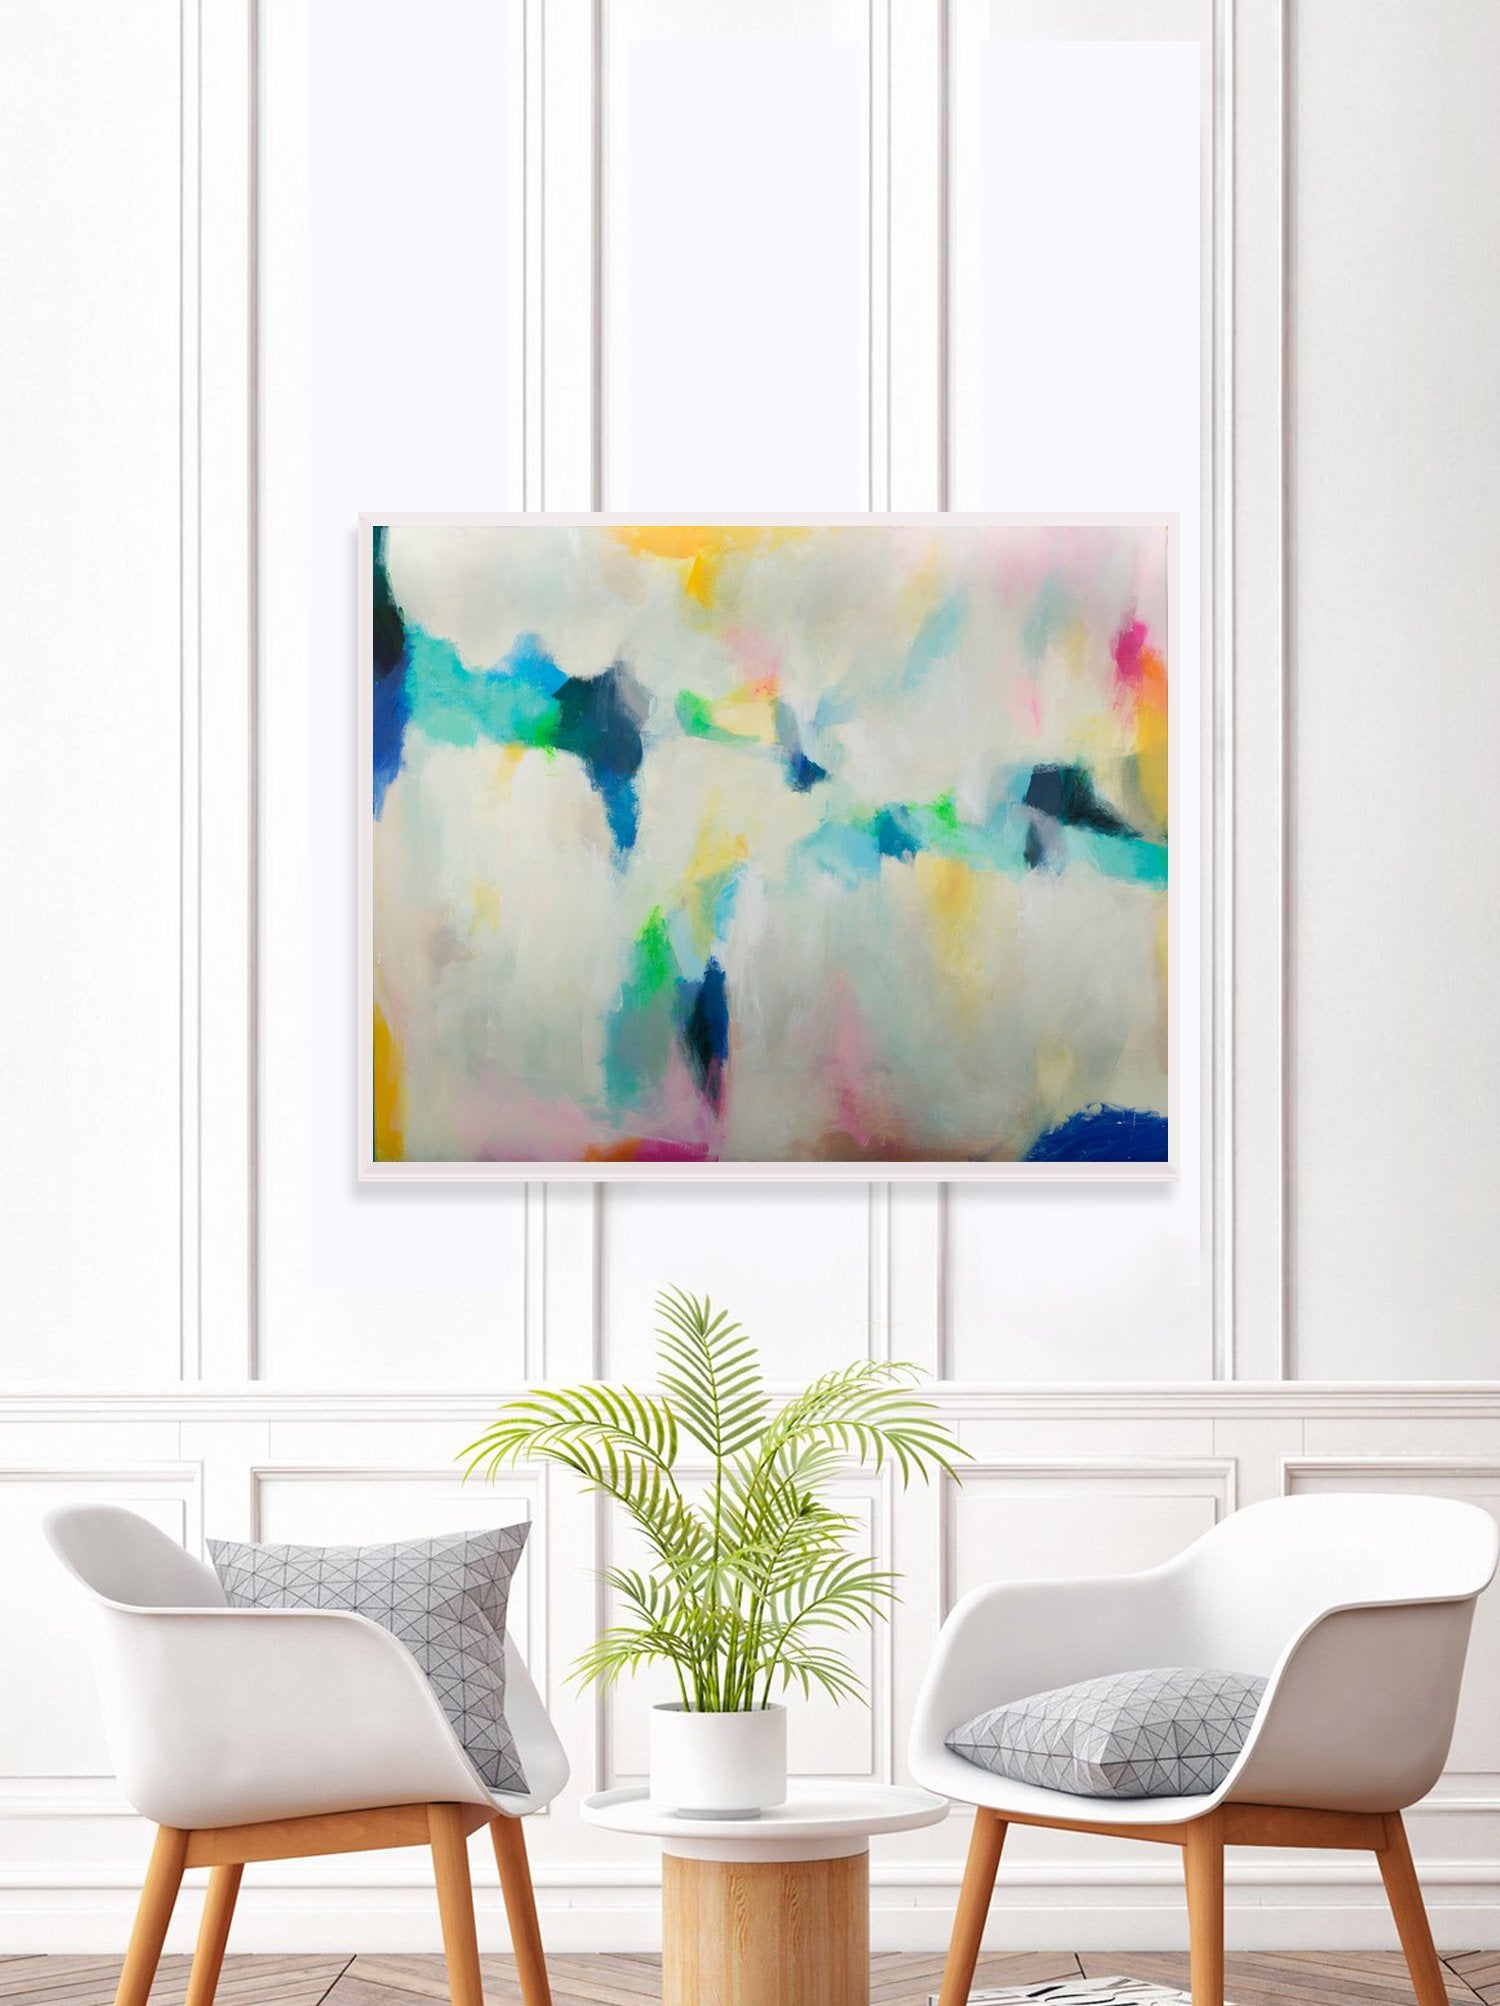 Canvas wall art, teal wall art, wall art decor, bedroom wall decor Colorful Painting White Abstract Painting blue Abstract - camilomattis.com